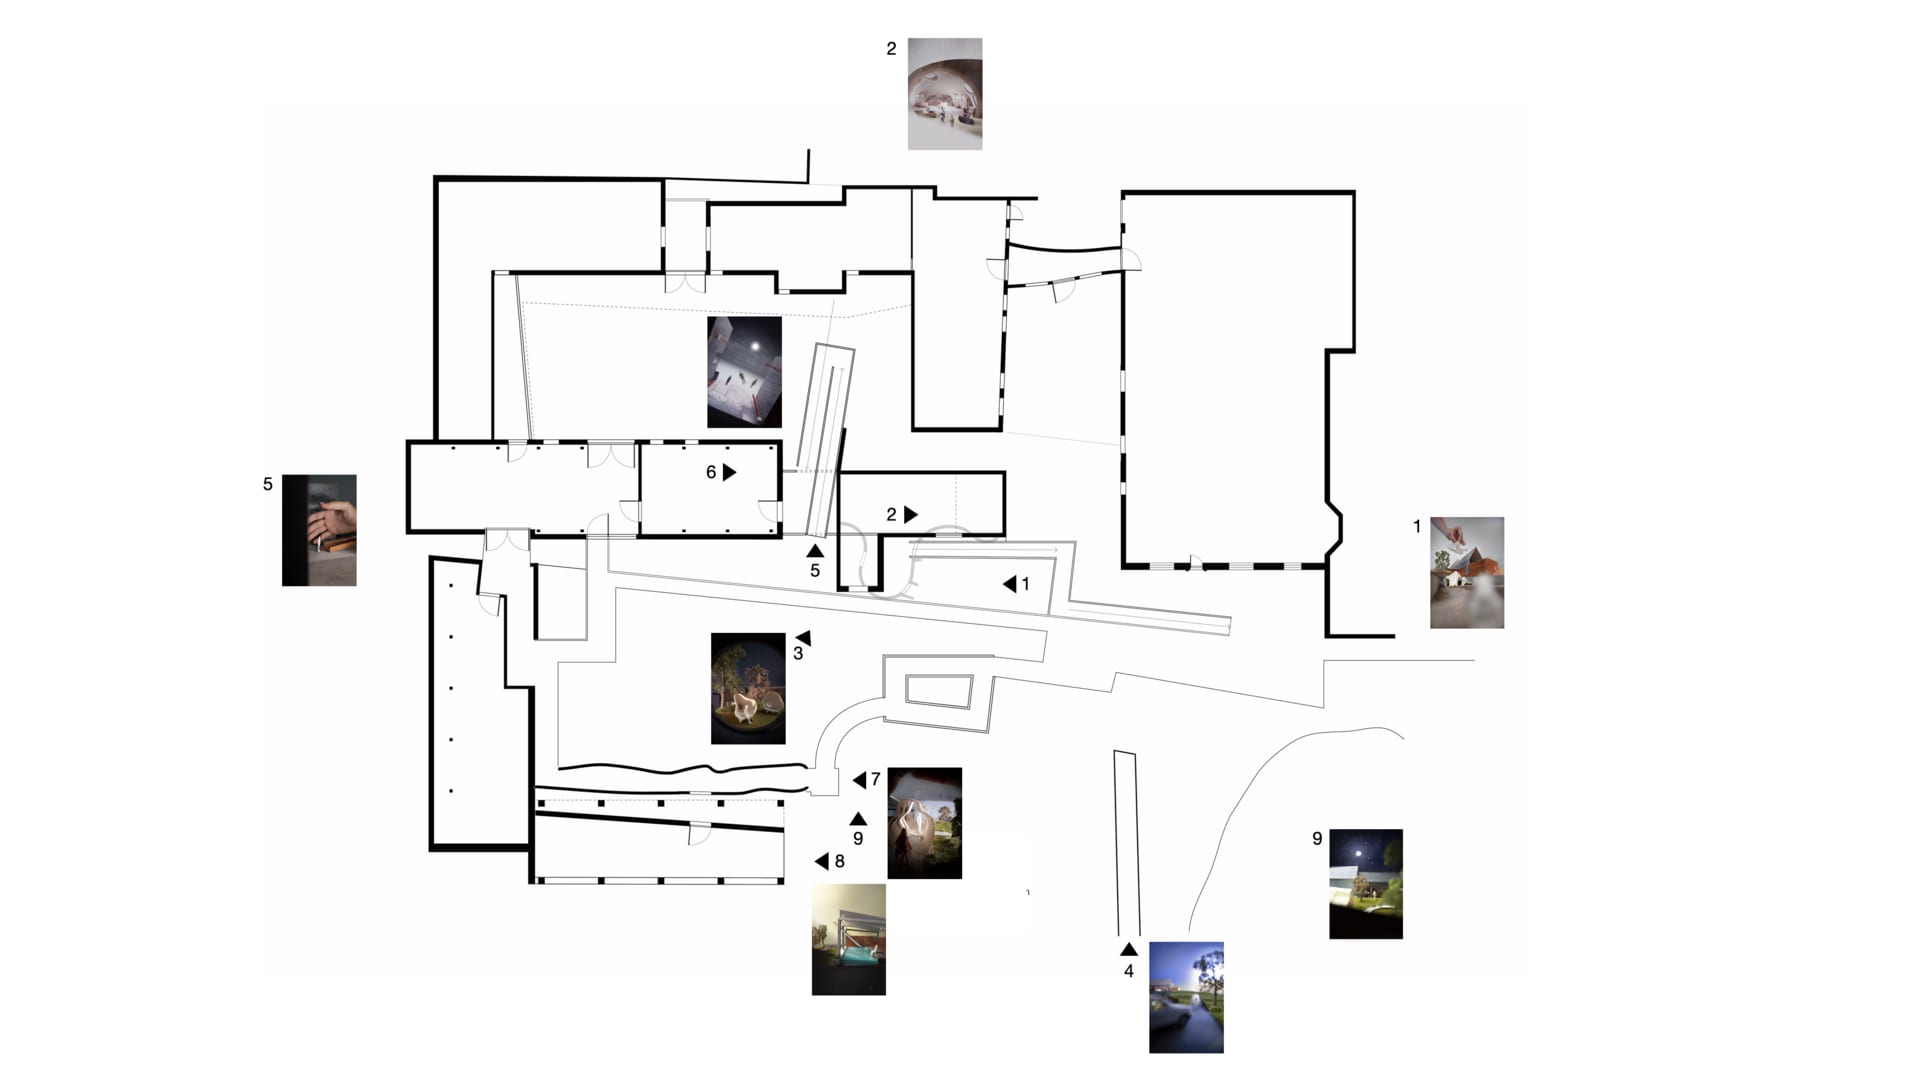 Floorplan with images from stories